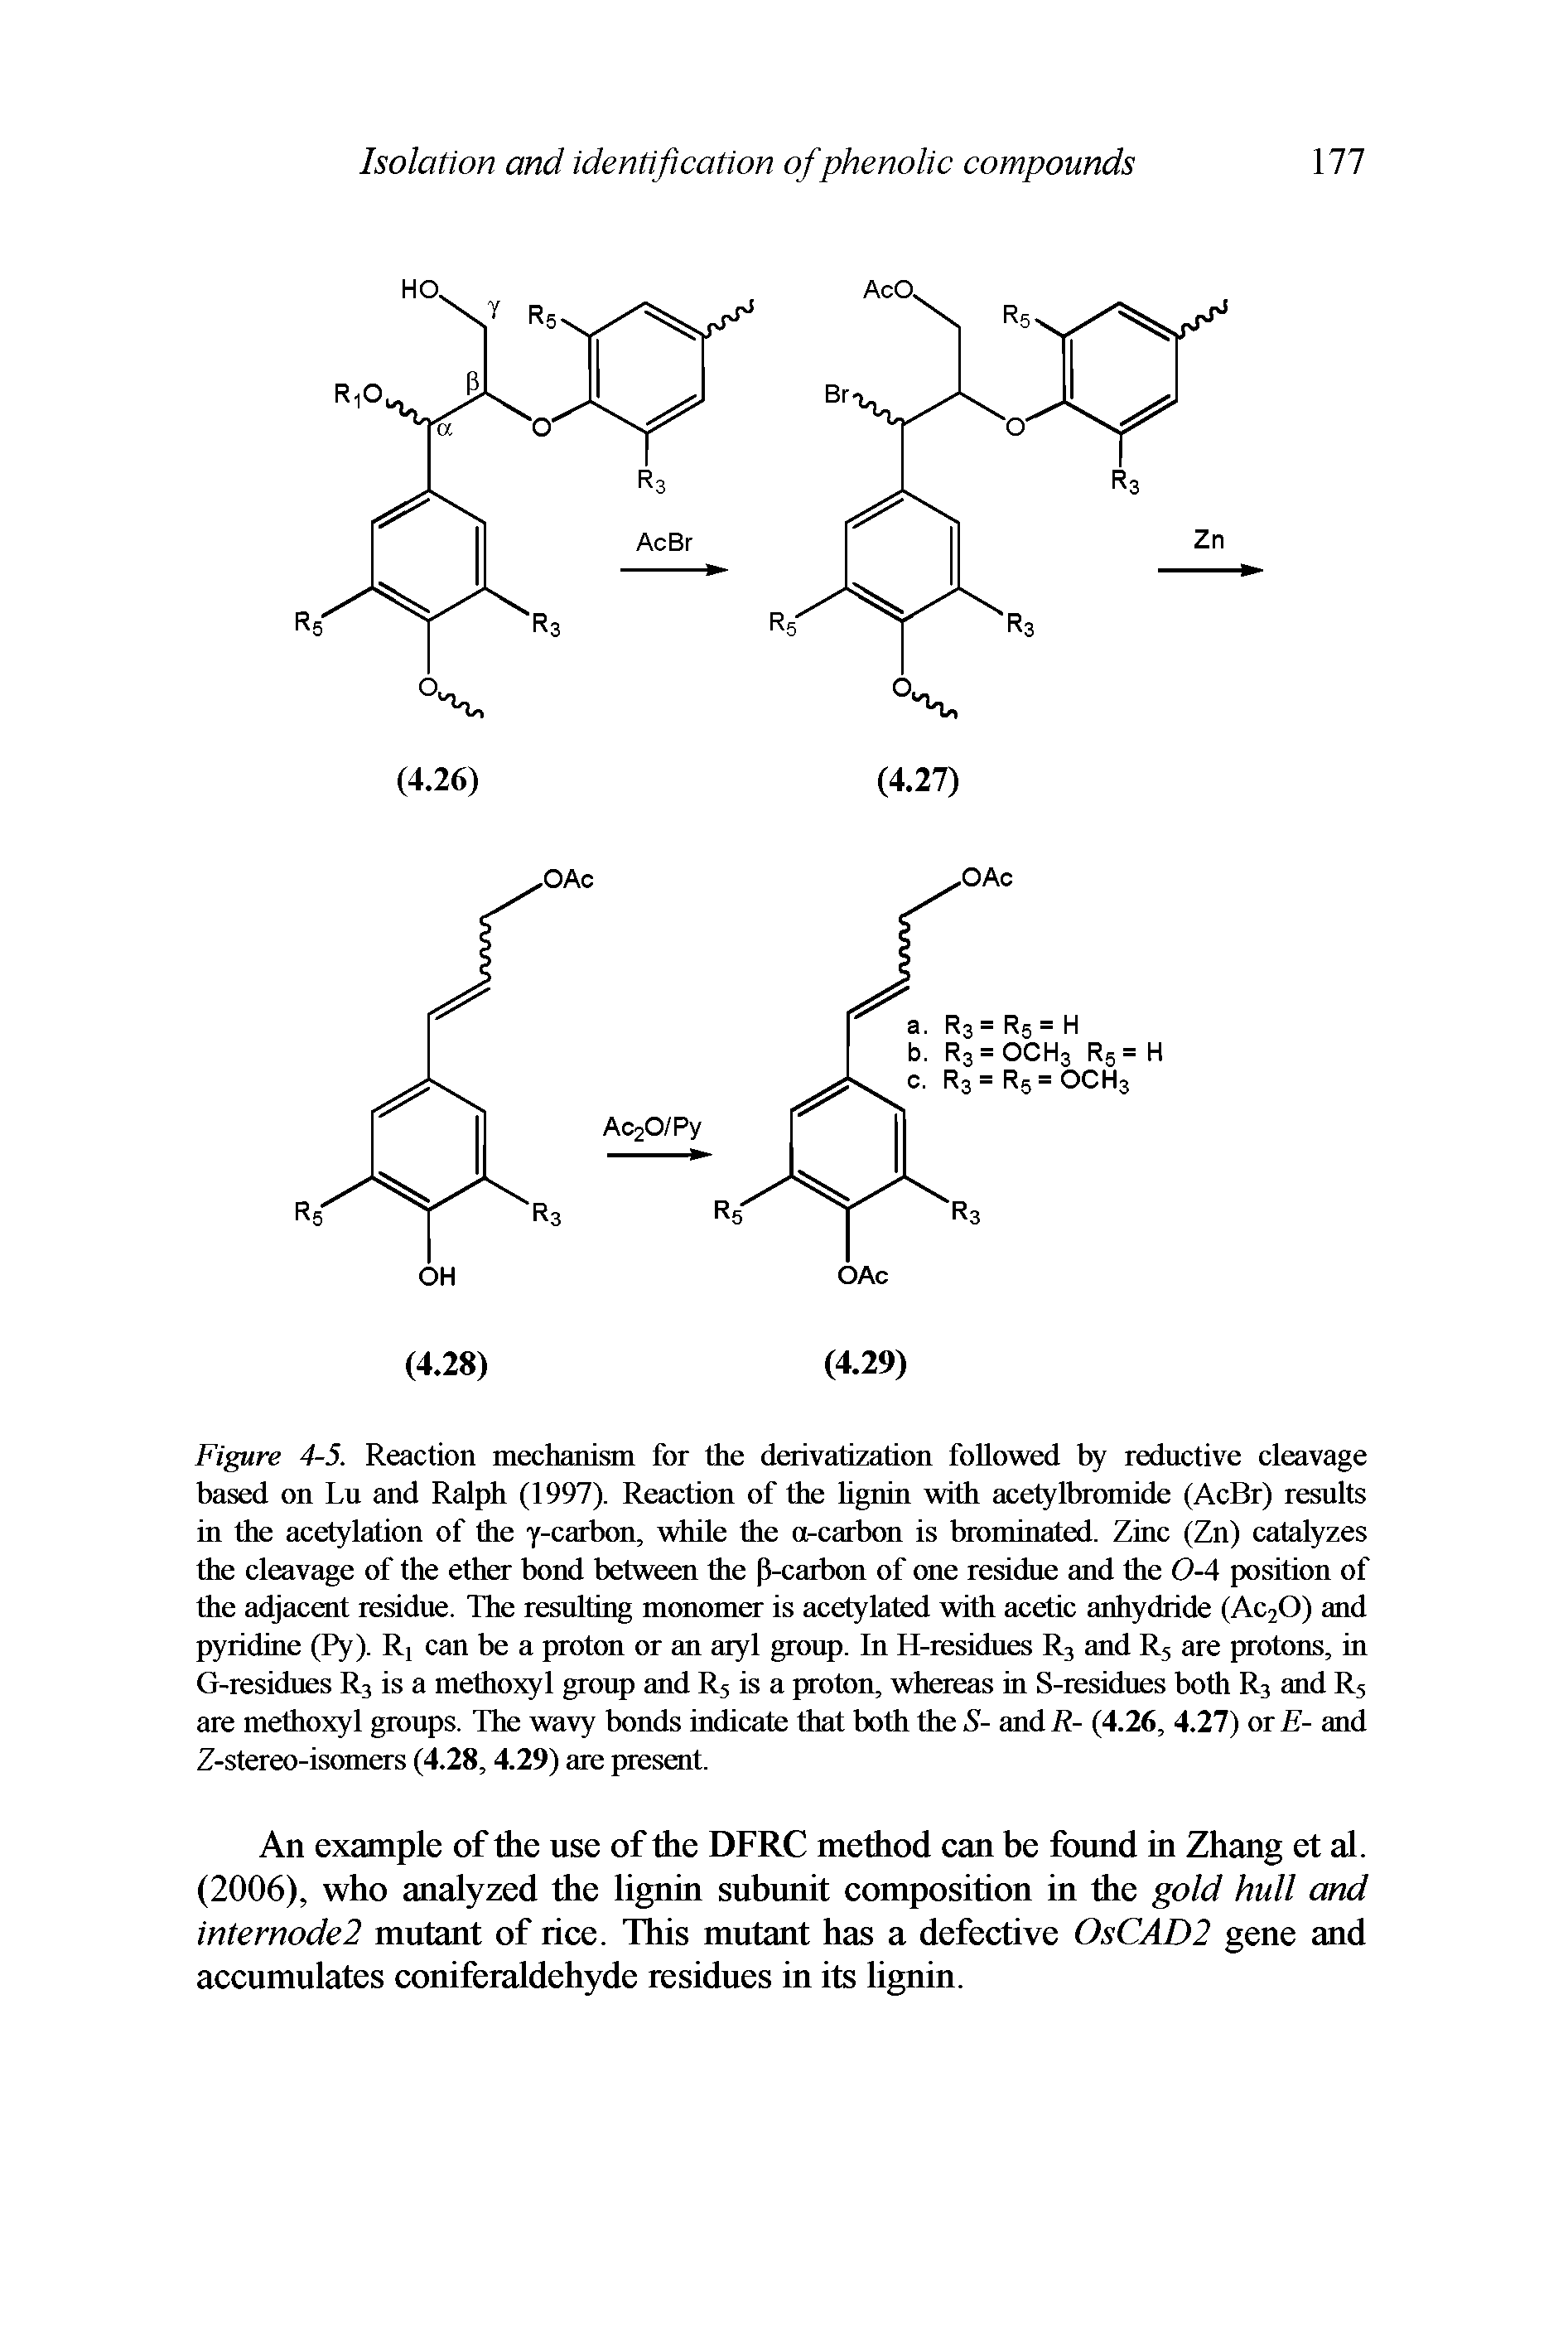 Figure 4-5. Reaction mechanism for the derivatization followed by reductive cleavage based on Lu and Ralph (1997). Reaction of the lignin with acetylbromide (AcBr) results in the acetylation of the y-carbon, while the a-carbon is brominated. Zinc (Zn) catalyzes the cleavage of the ether bond between the P-carbon of one residue and the 0-4 position of the adjacent residue. The resulting monomer is acetylated with acetic anhydride (Ac20) and pyridine (Py). R can be a proton or an aryl group. In H-residues R3 and R5 are protons, in G-residues R3 is a methoxyl group and R5 is a proton, whereas in S-residues both R3 and R5 are methoxyl groups. The wavy bonds indicate that both the S- and R- (4.26, 4.27) or E- and Z-stereo-isomers (4.28, 4.29) are present.